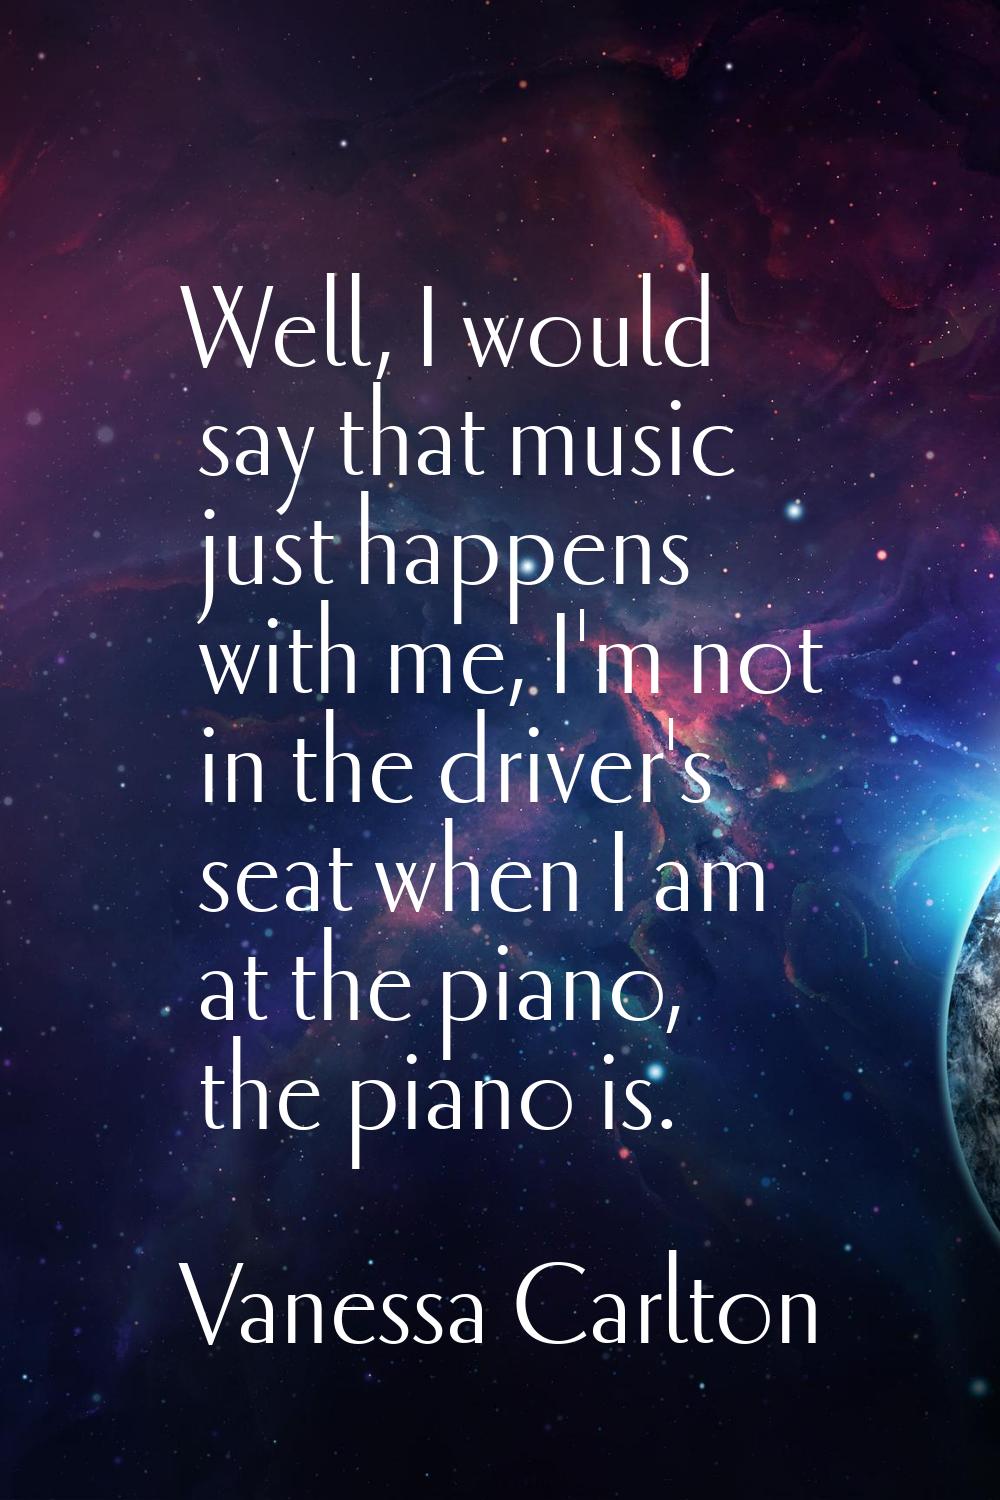 Well, I would say that music just happens with me, I'm not in the driver's seat when I am at the pi